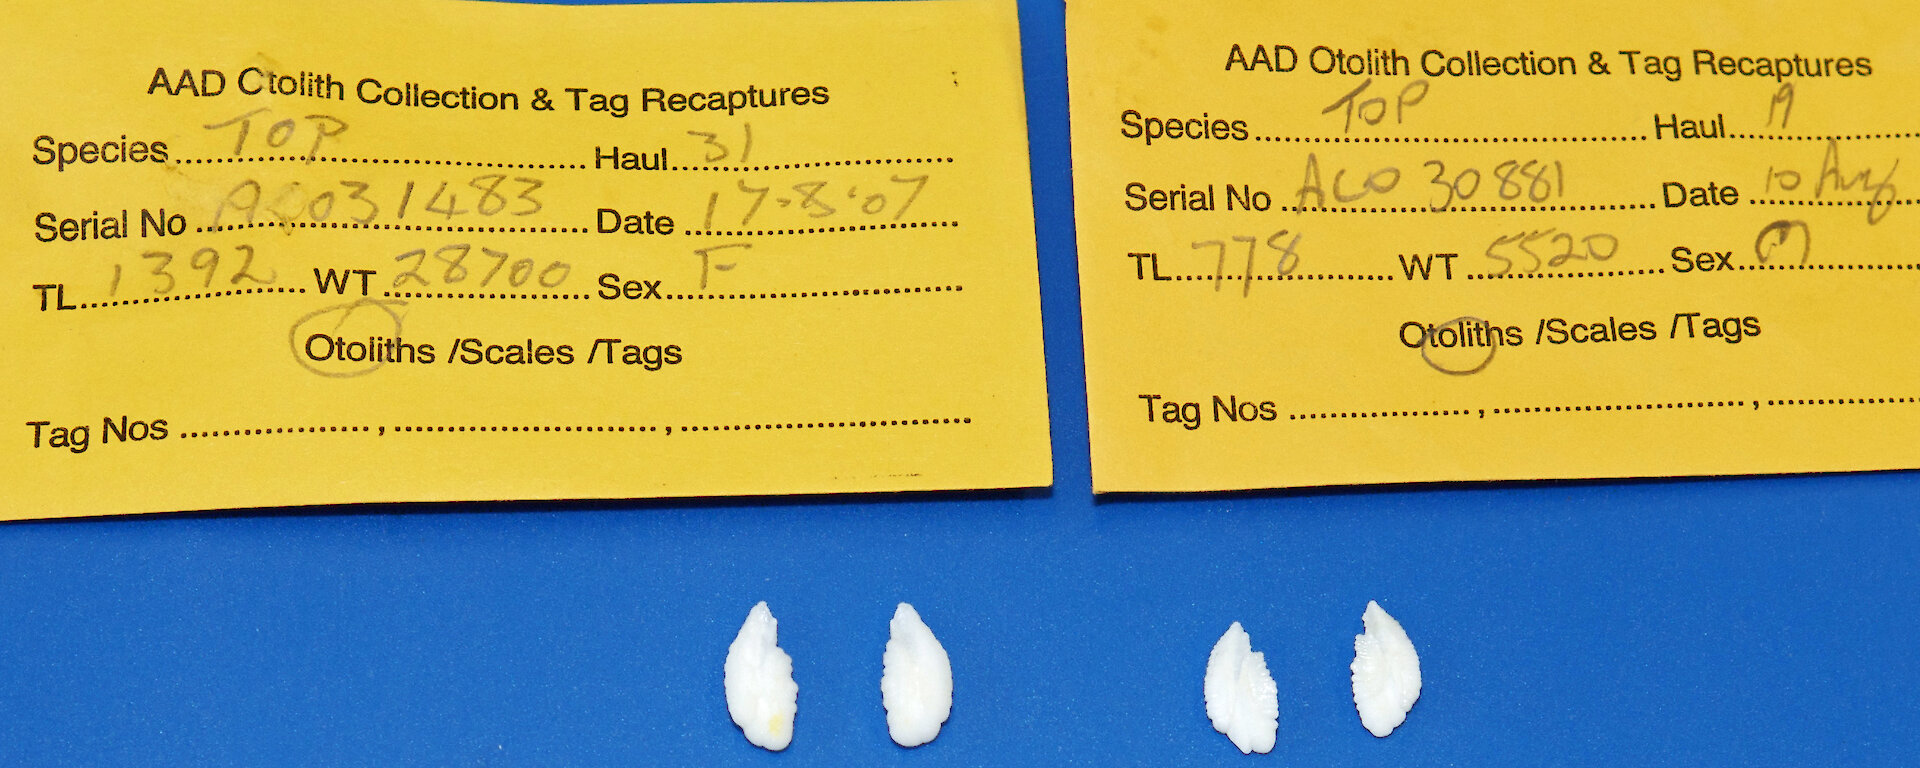 Pairs of ‘otoliths’ or ear bones from Patagonian toothfish.